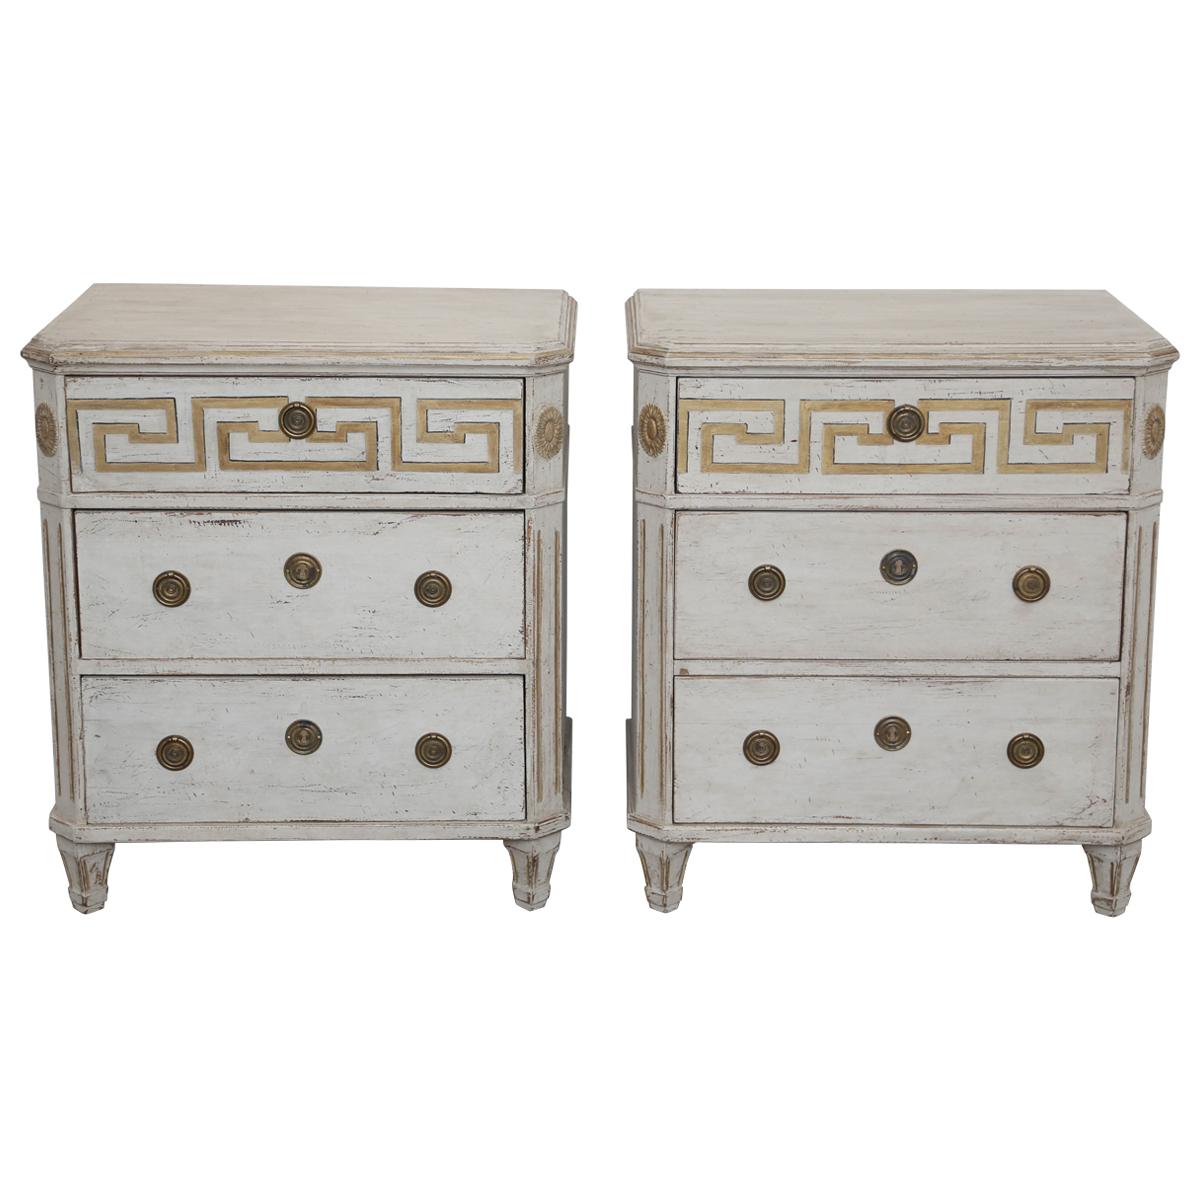 Pair of Antique Swedish Gustavian Style Painted Chests with Greek Key